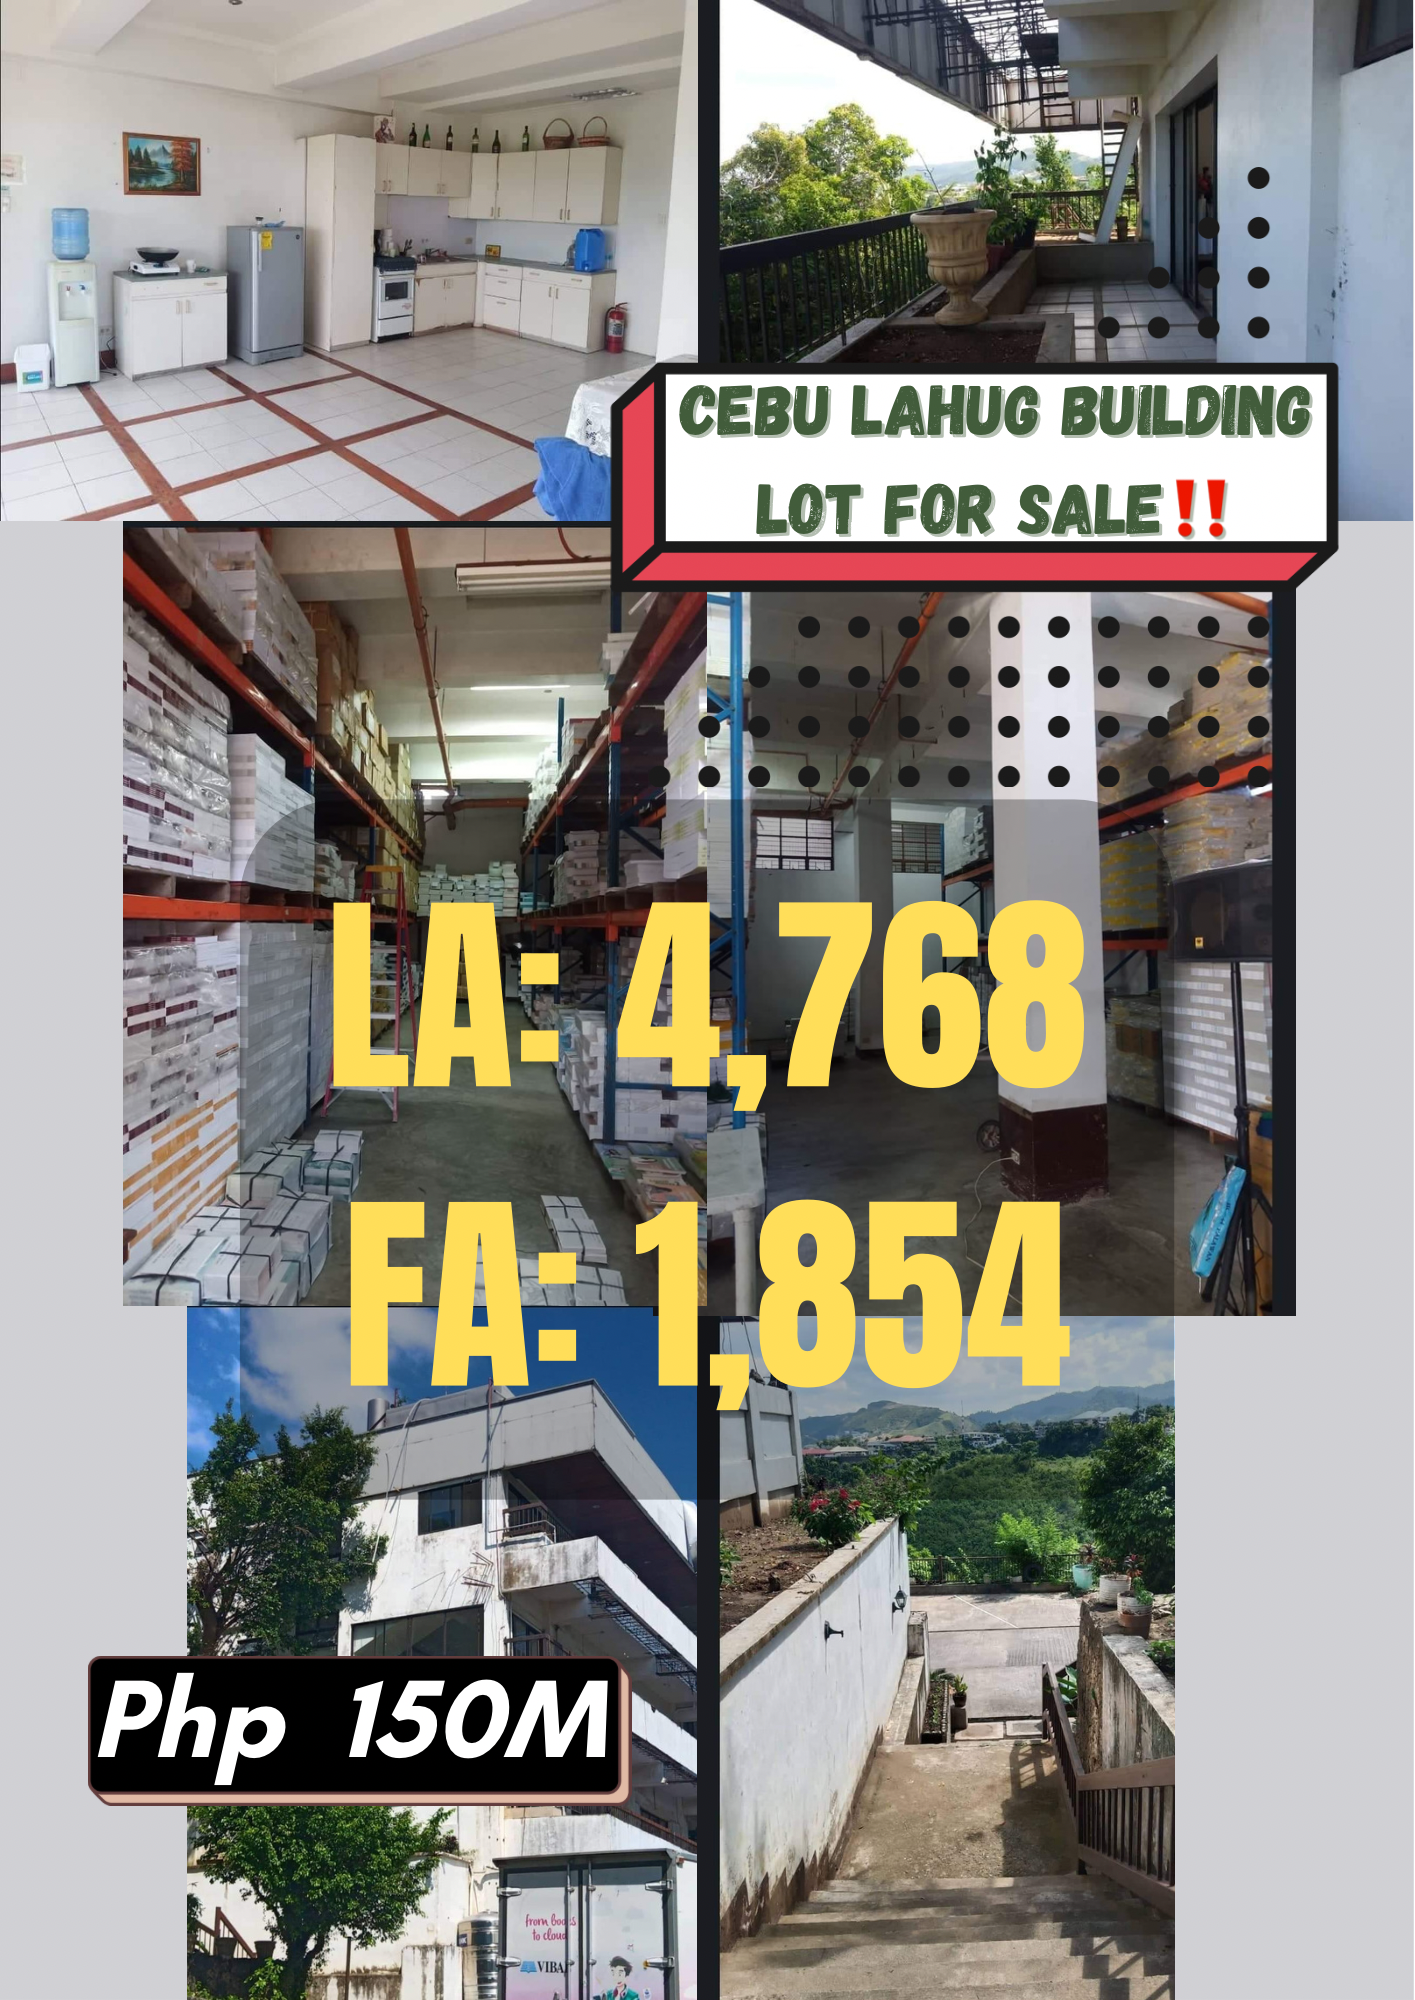 Cebu Lahug Building Lot for Sale with 4,768 sq.m‼️